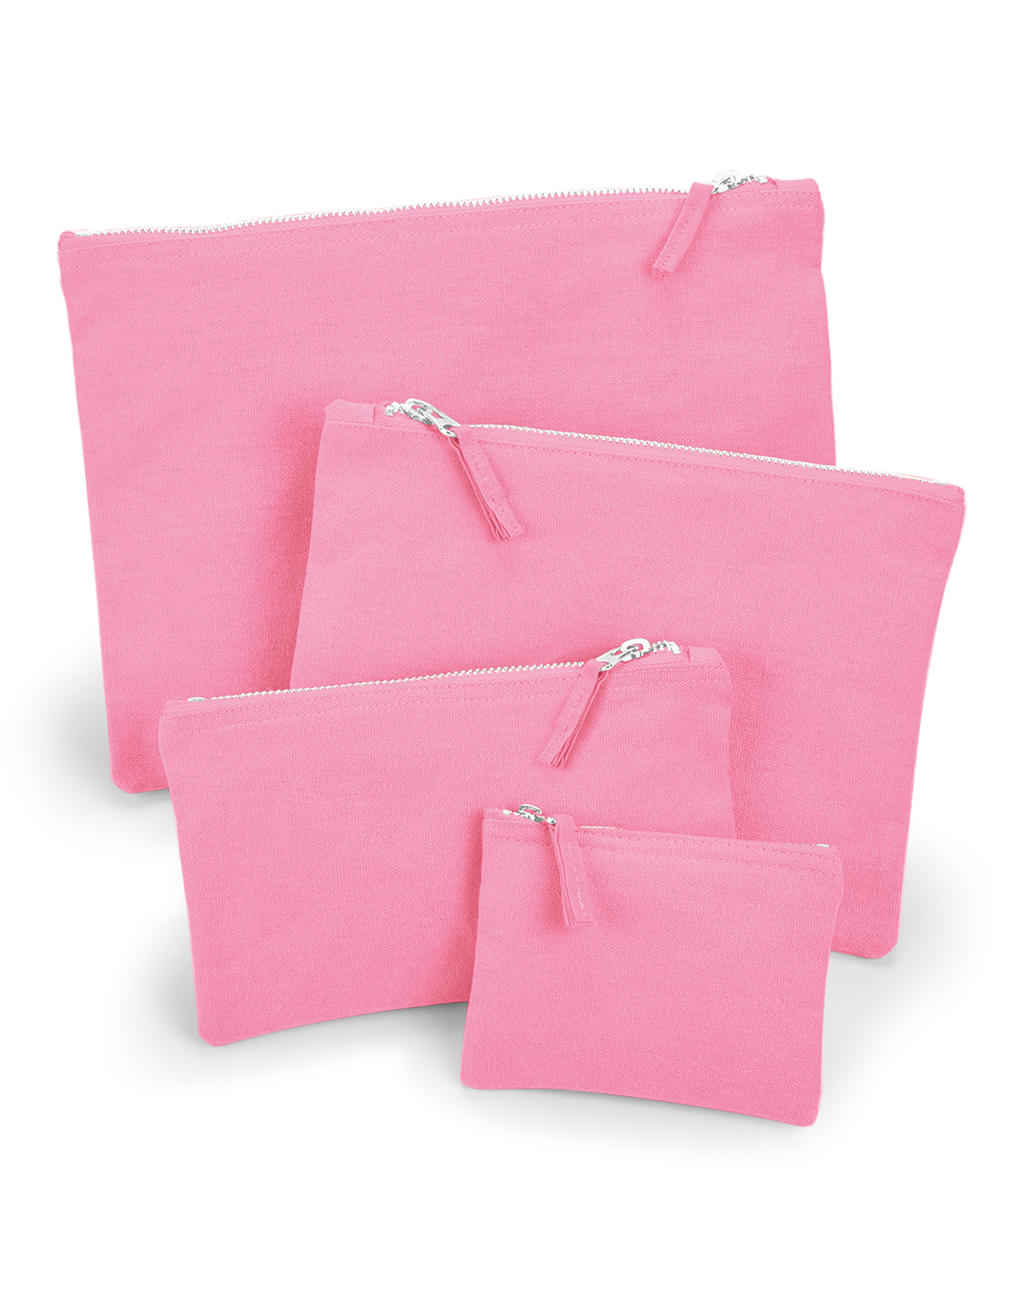  Canvas Accessory Pouch in Farbe True Pink